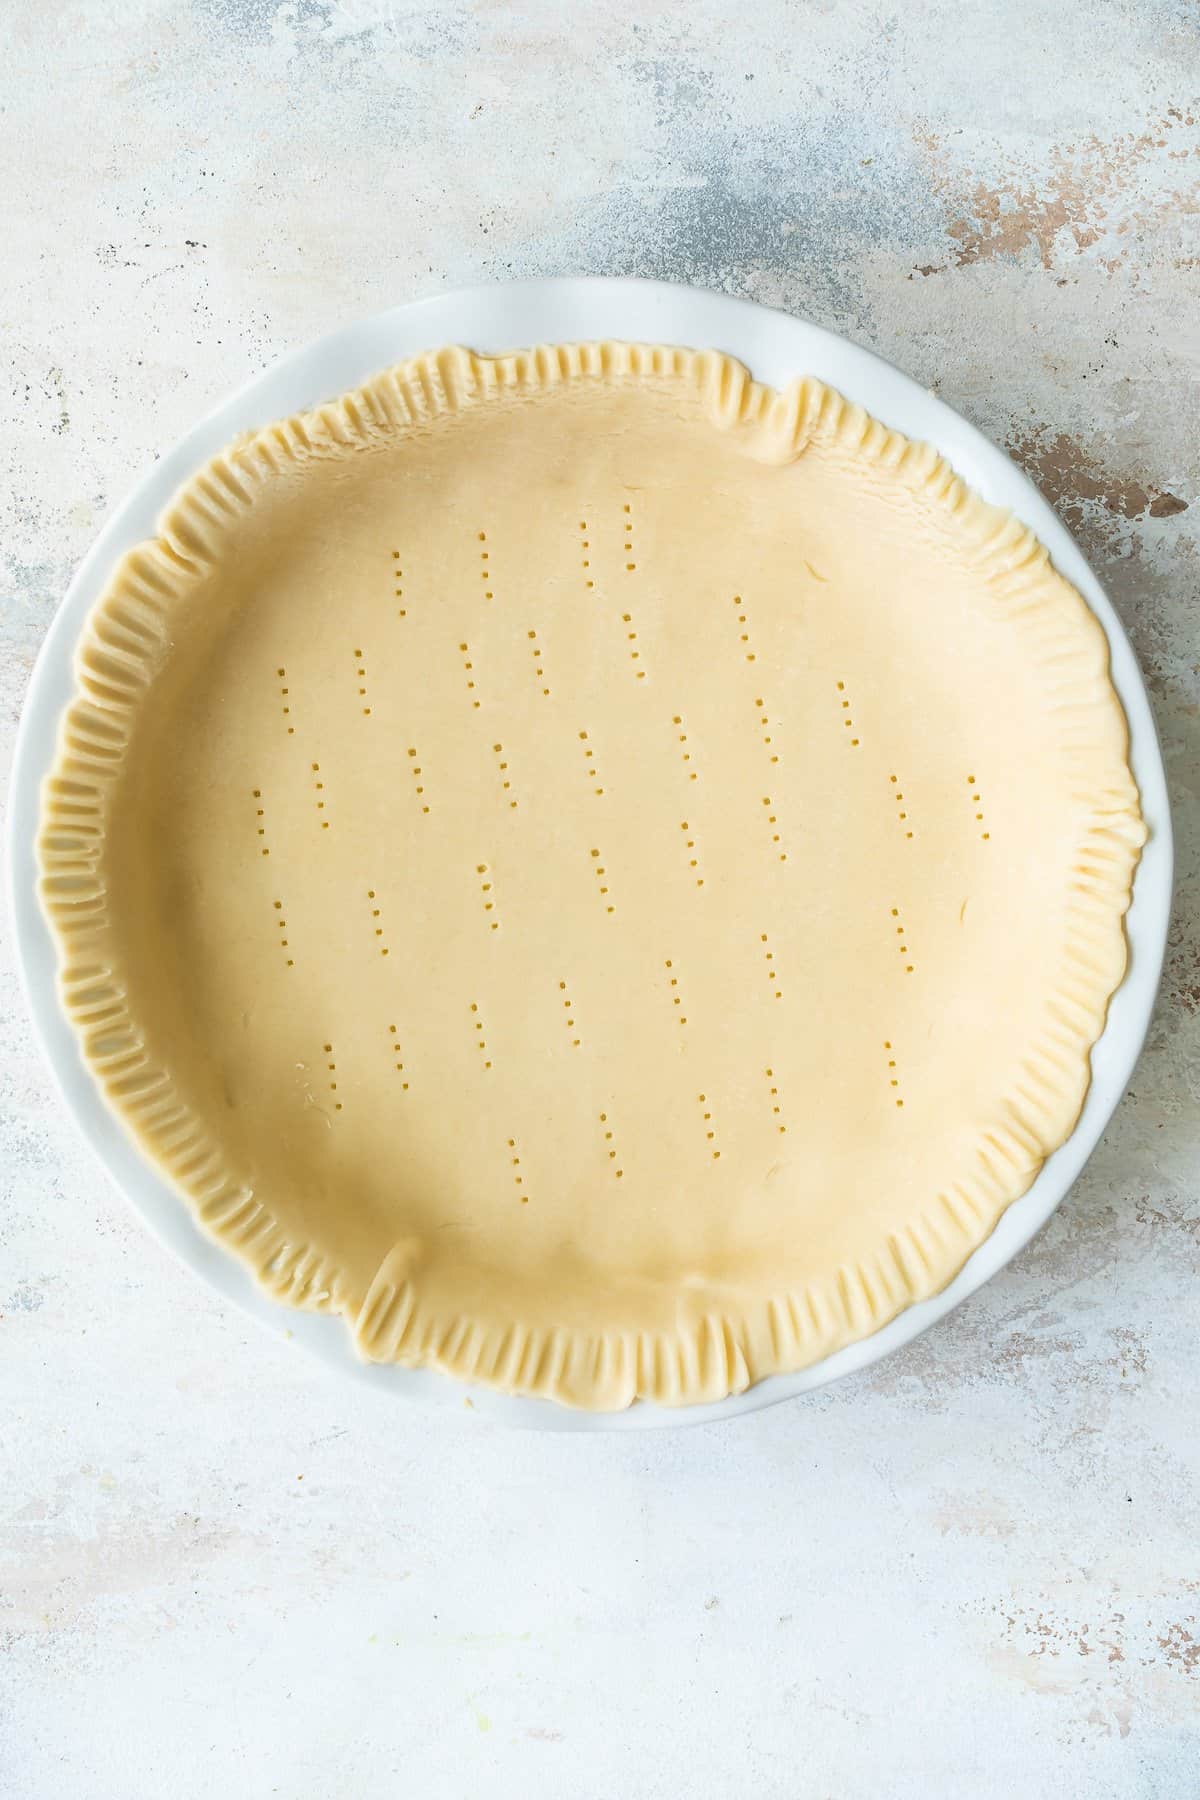 Pie crust with fork indentations.